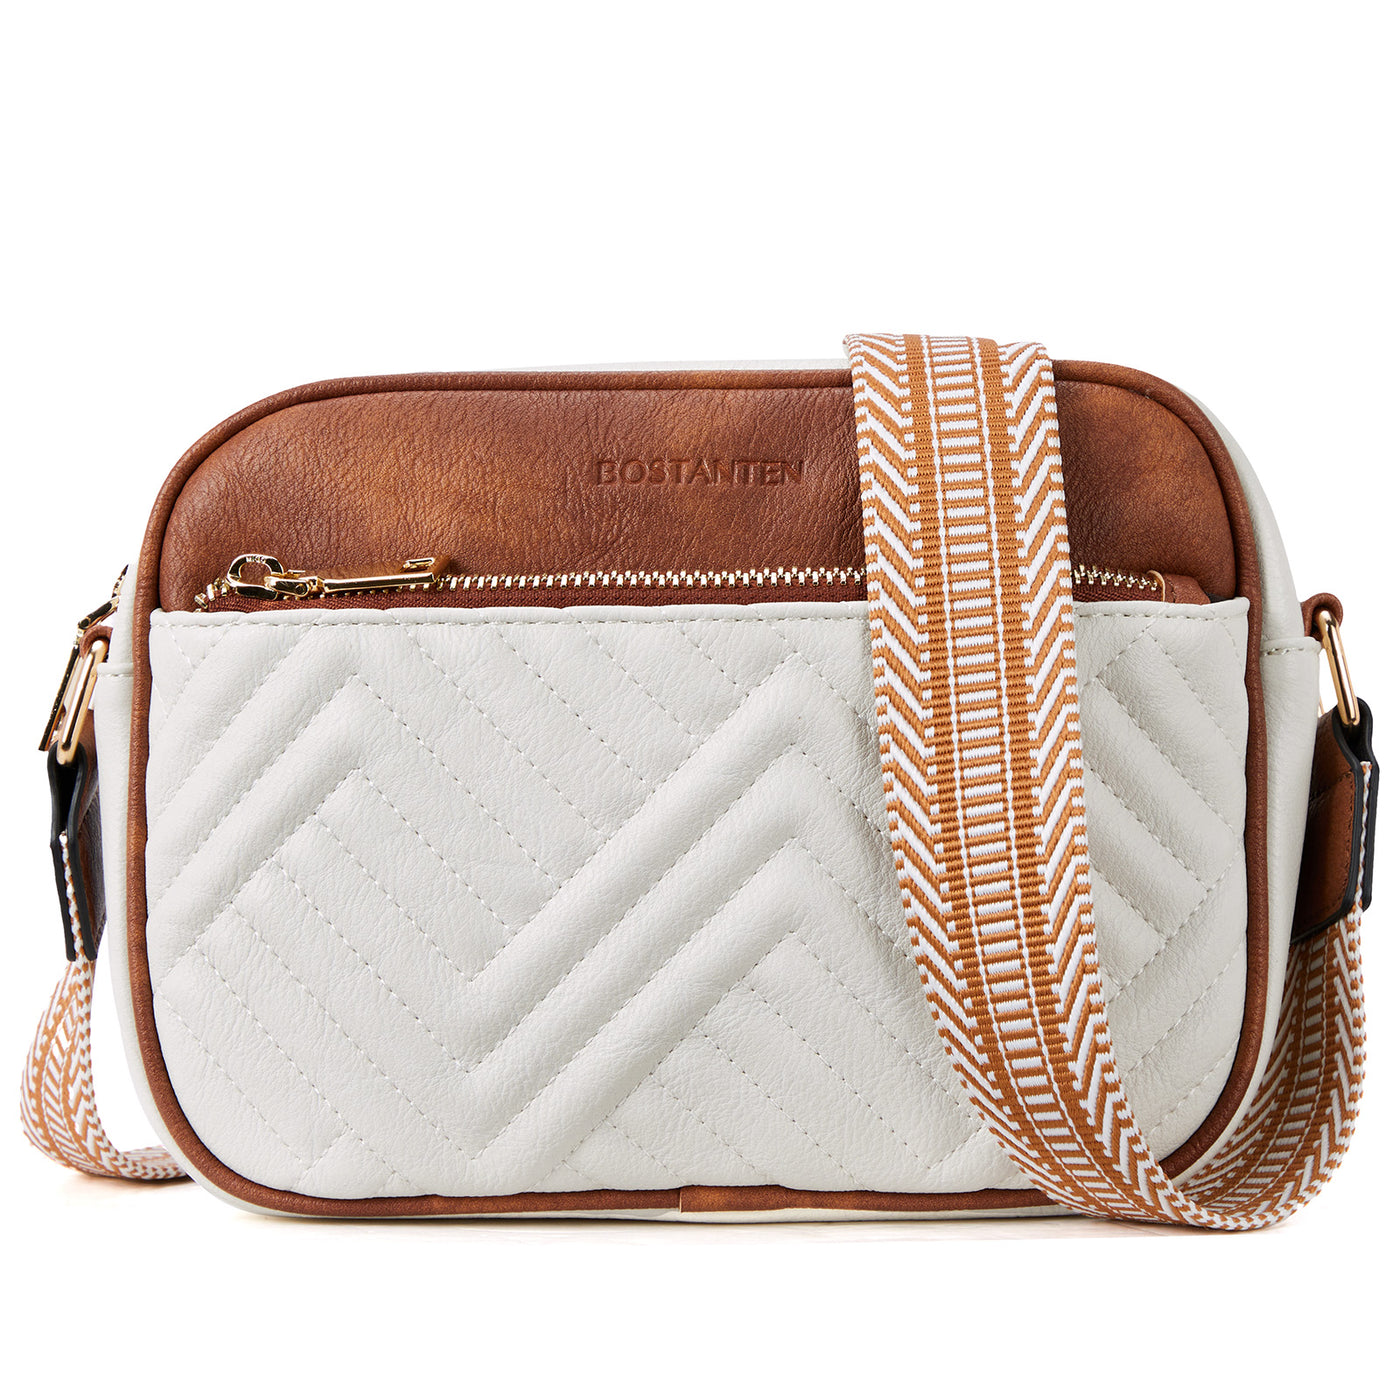 Nola Stylish Quilted Crossbody Bag for Women